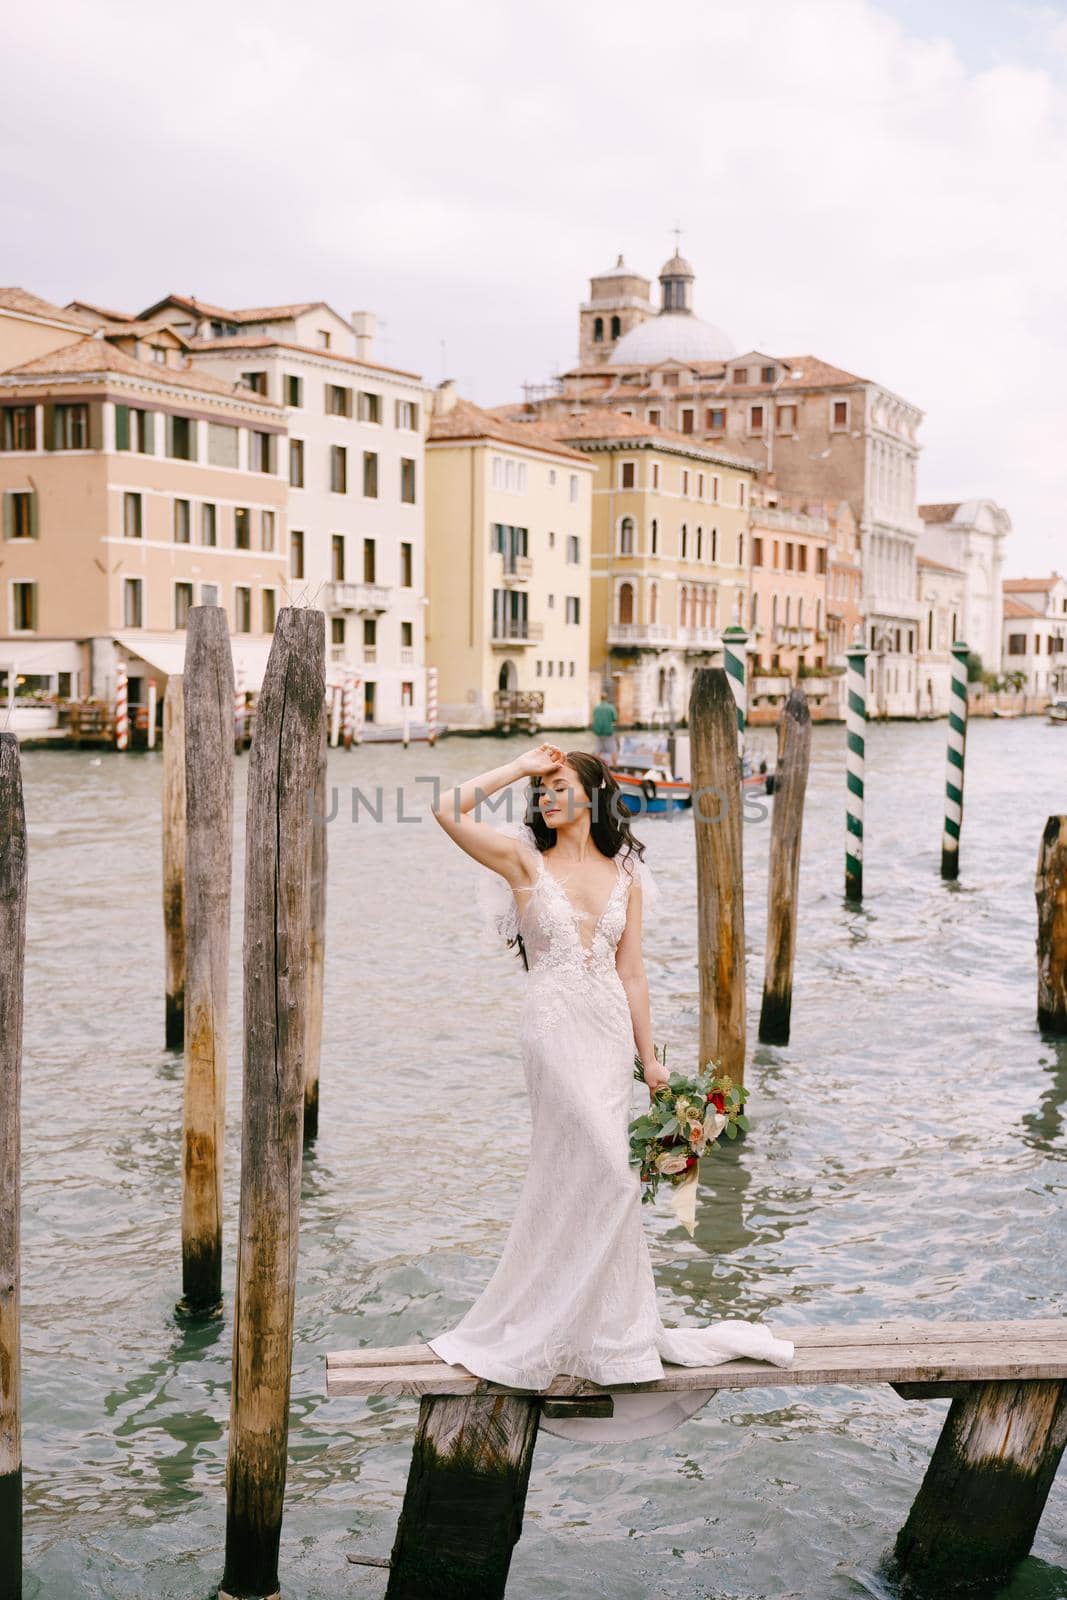 Italy wedding in Venice. The bride are standing on a wooden pier for boats and gondolas, near the Striped green and white mooring poles, against backdrop of facades of Grand Canal buildings. by Nadtochiy